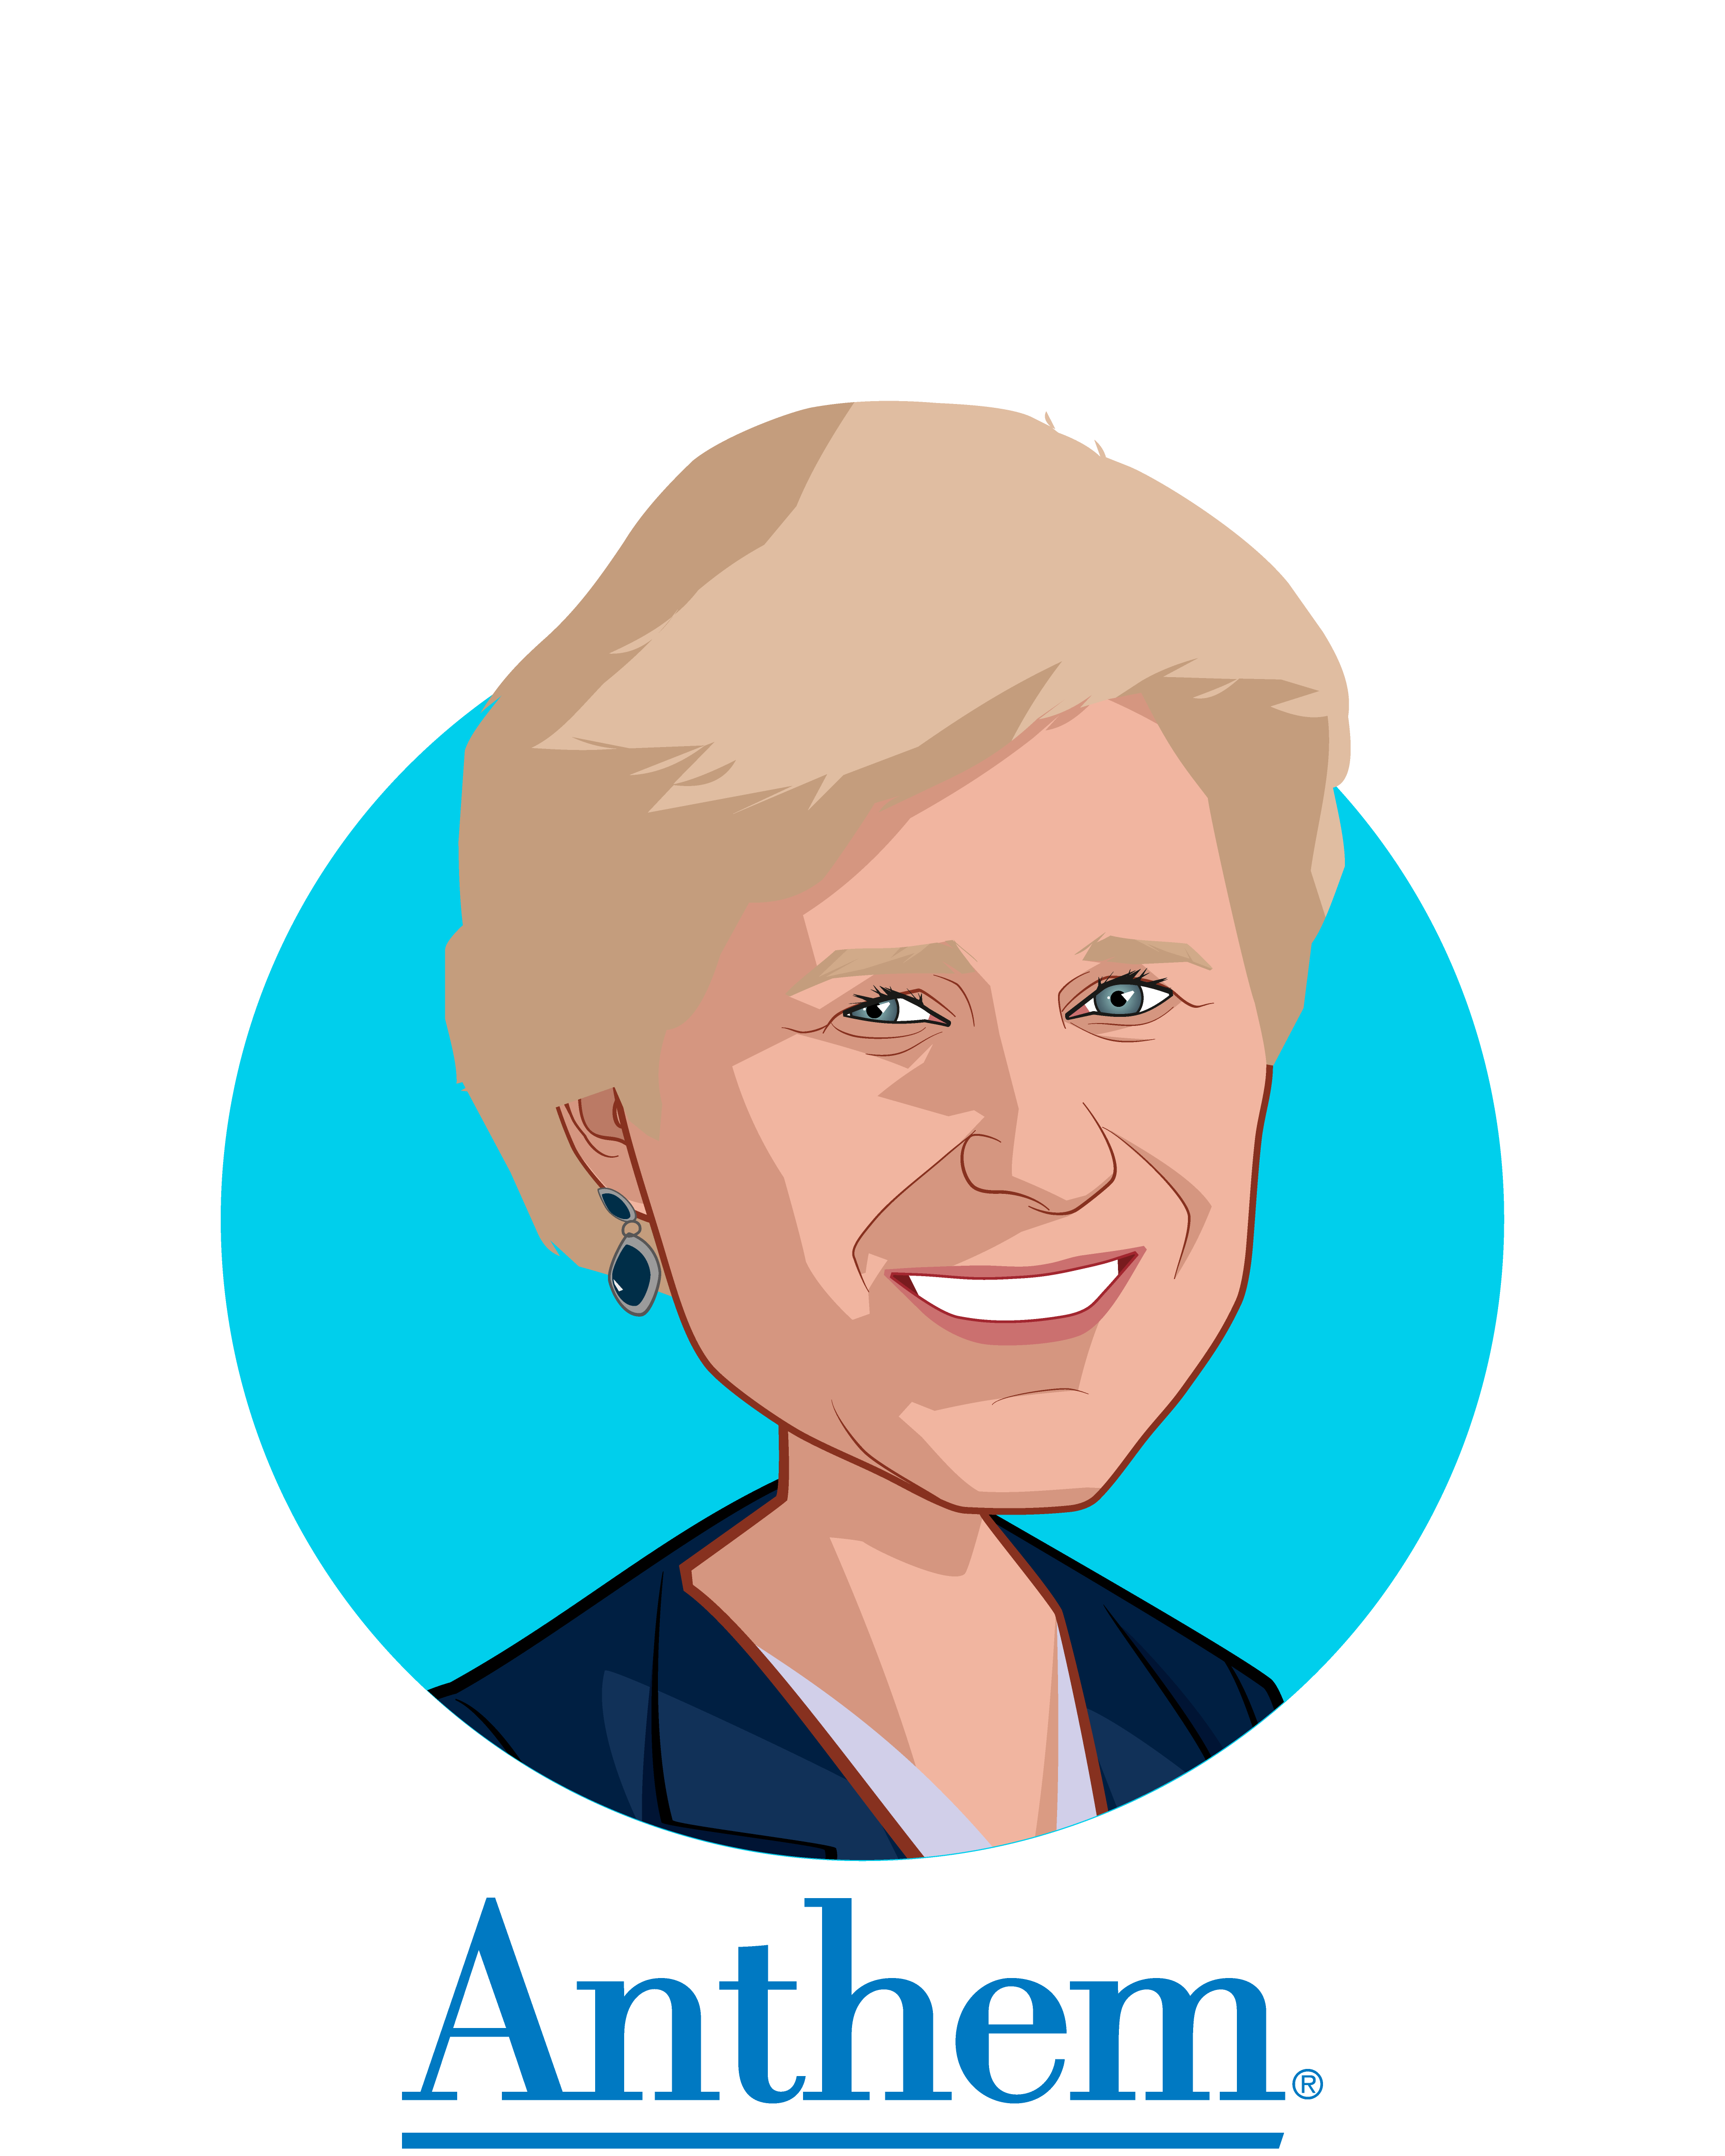 Main caricature of Gail K. Boudreaux, who is speaking at HLTH and is President and CEO at Anthem, Inc.